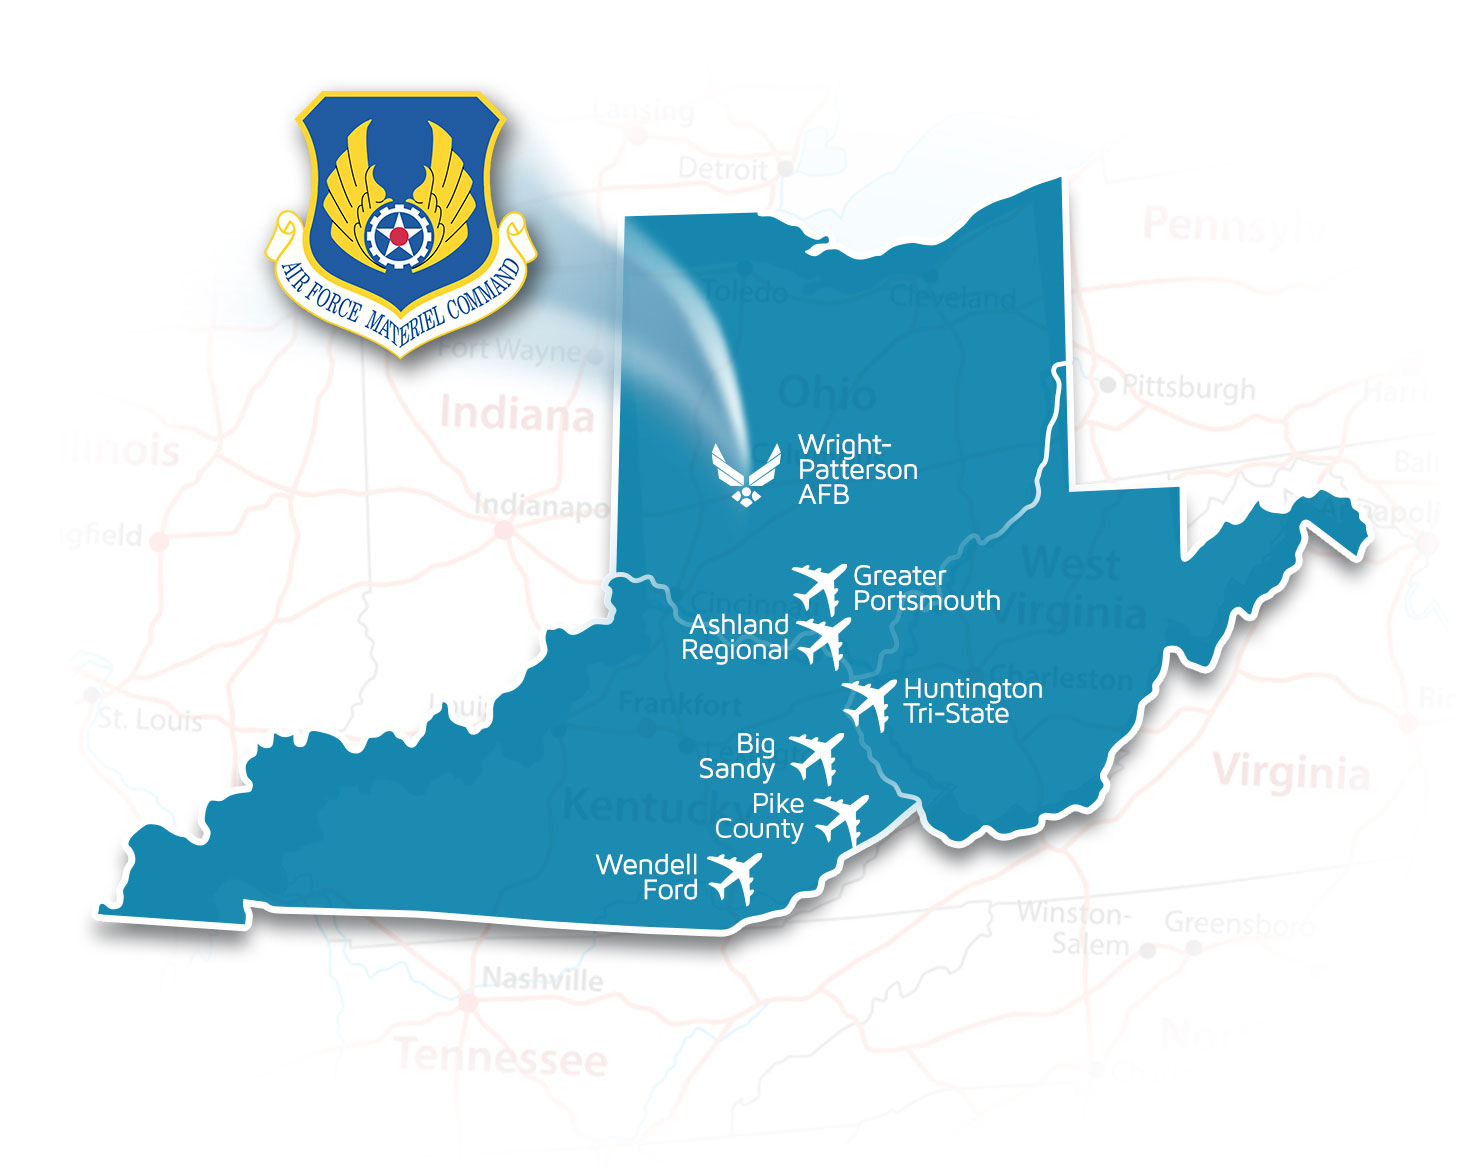 Wright-Patterson Air Force Base Located in the Appalachian Sky Region